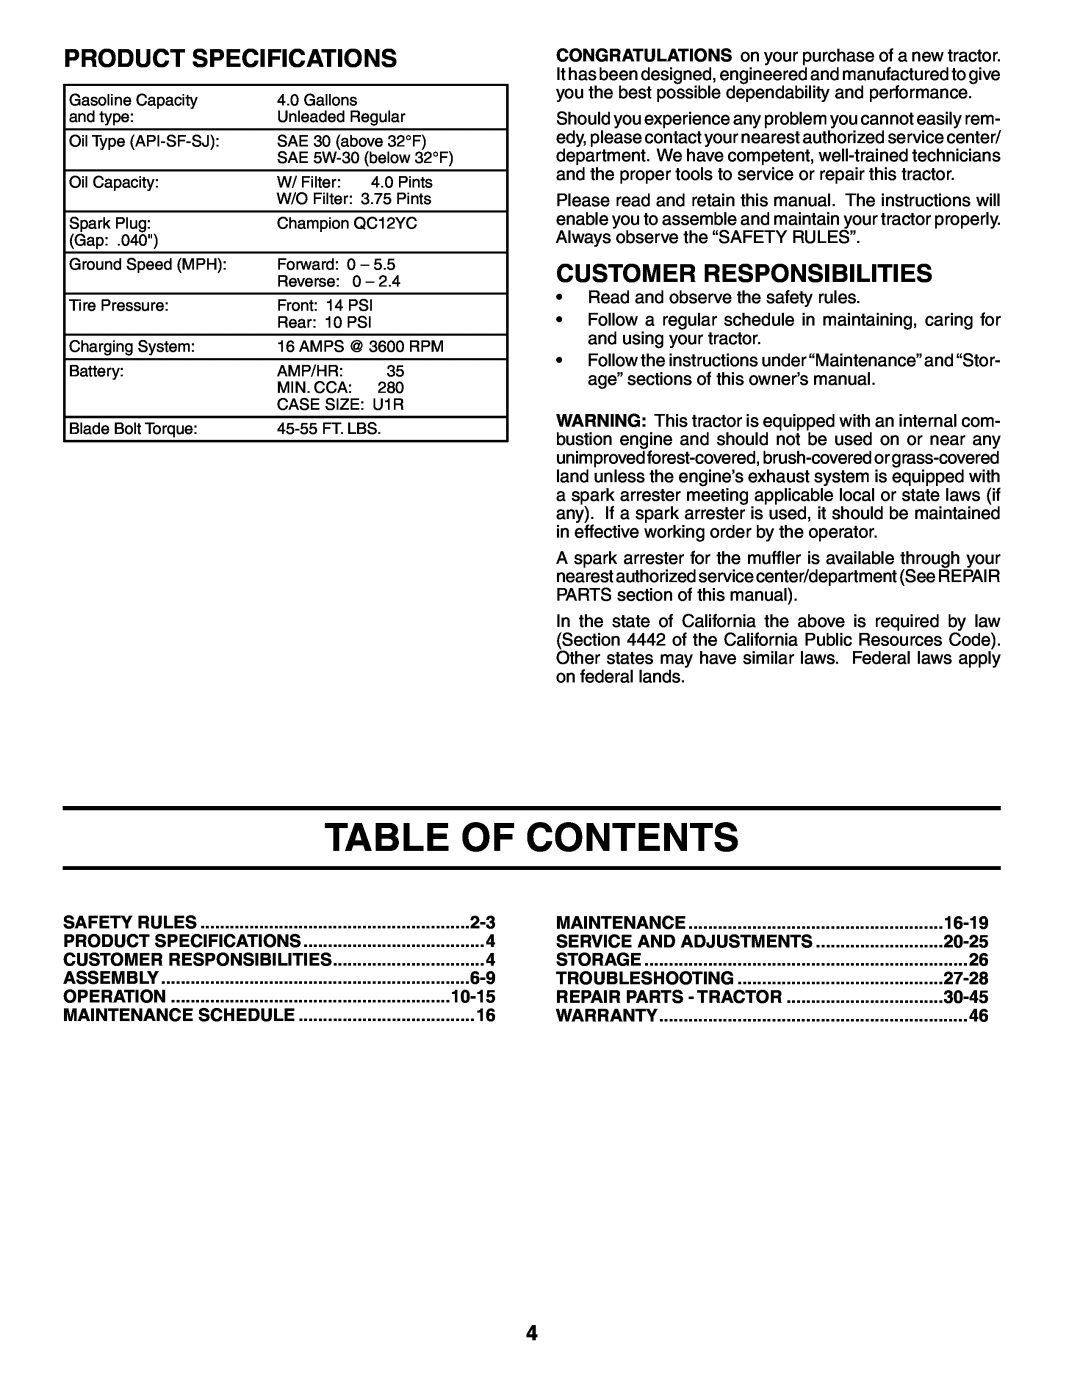 Poulan PD25PH48STB owner manual Table Of Contents, Product Specifications, Customer Responsibilities 